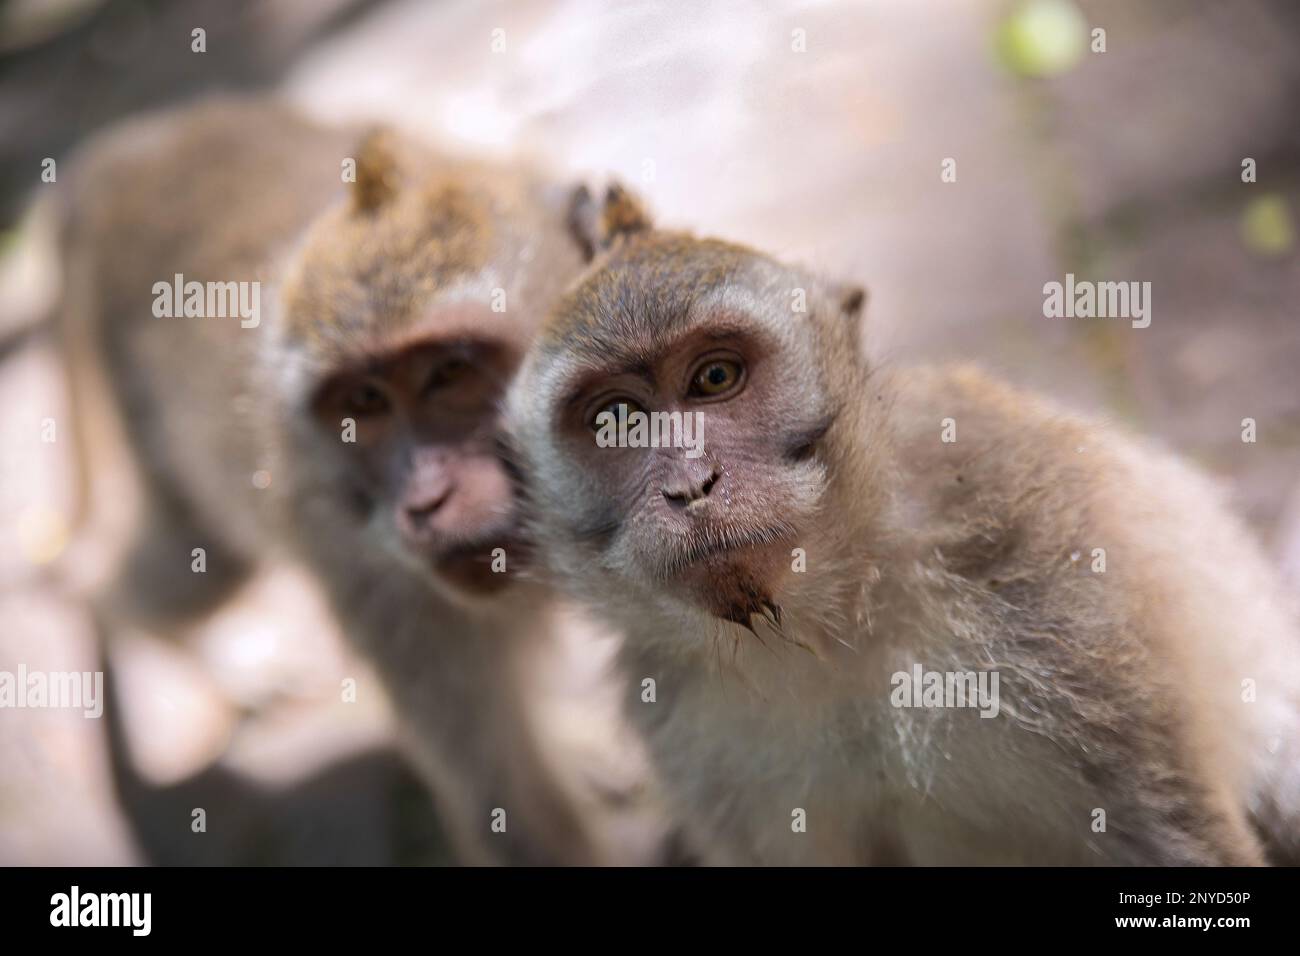 Close-up of a young cynomolgus monkey cheekily looking at the camera, behind him another monkey, in the background diffusely a sunlit stone floor. Stock Photo